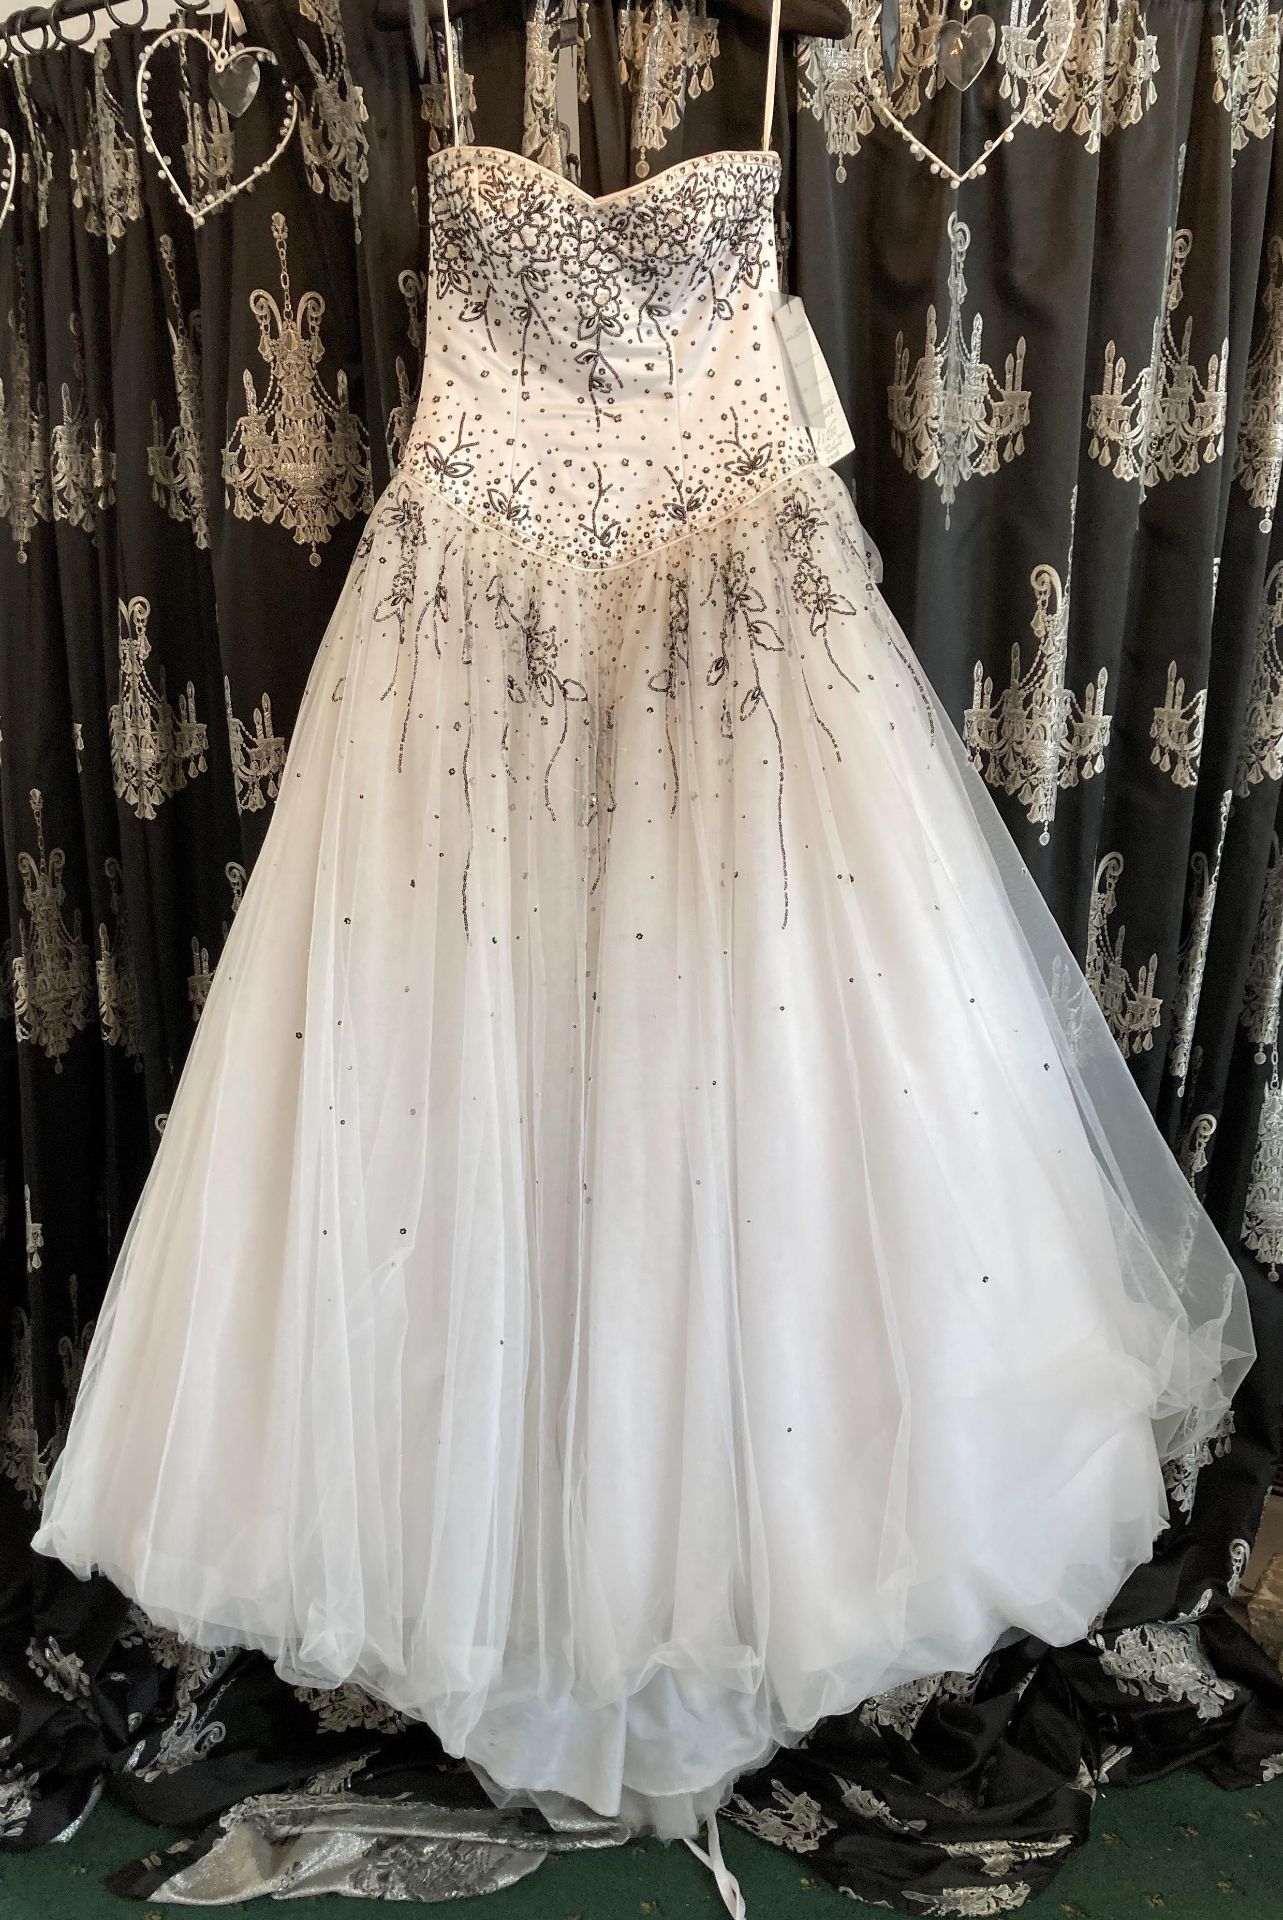 Princess ball gown (exhibition sample - damage on tulle overlay), black & white, size 10.